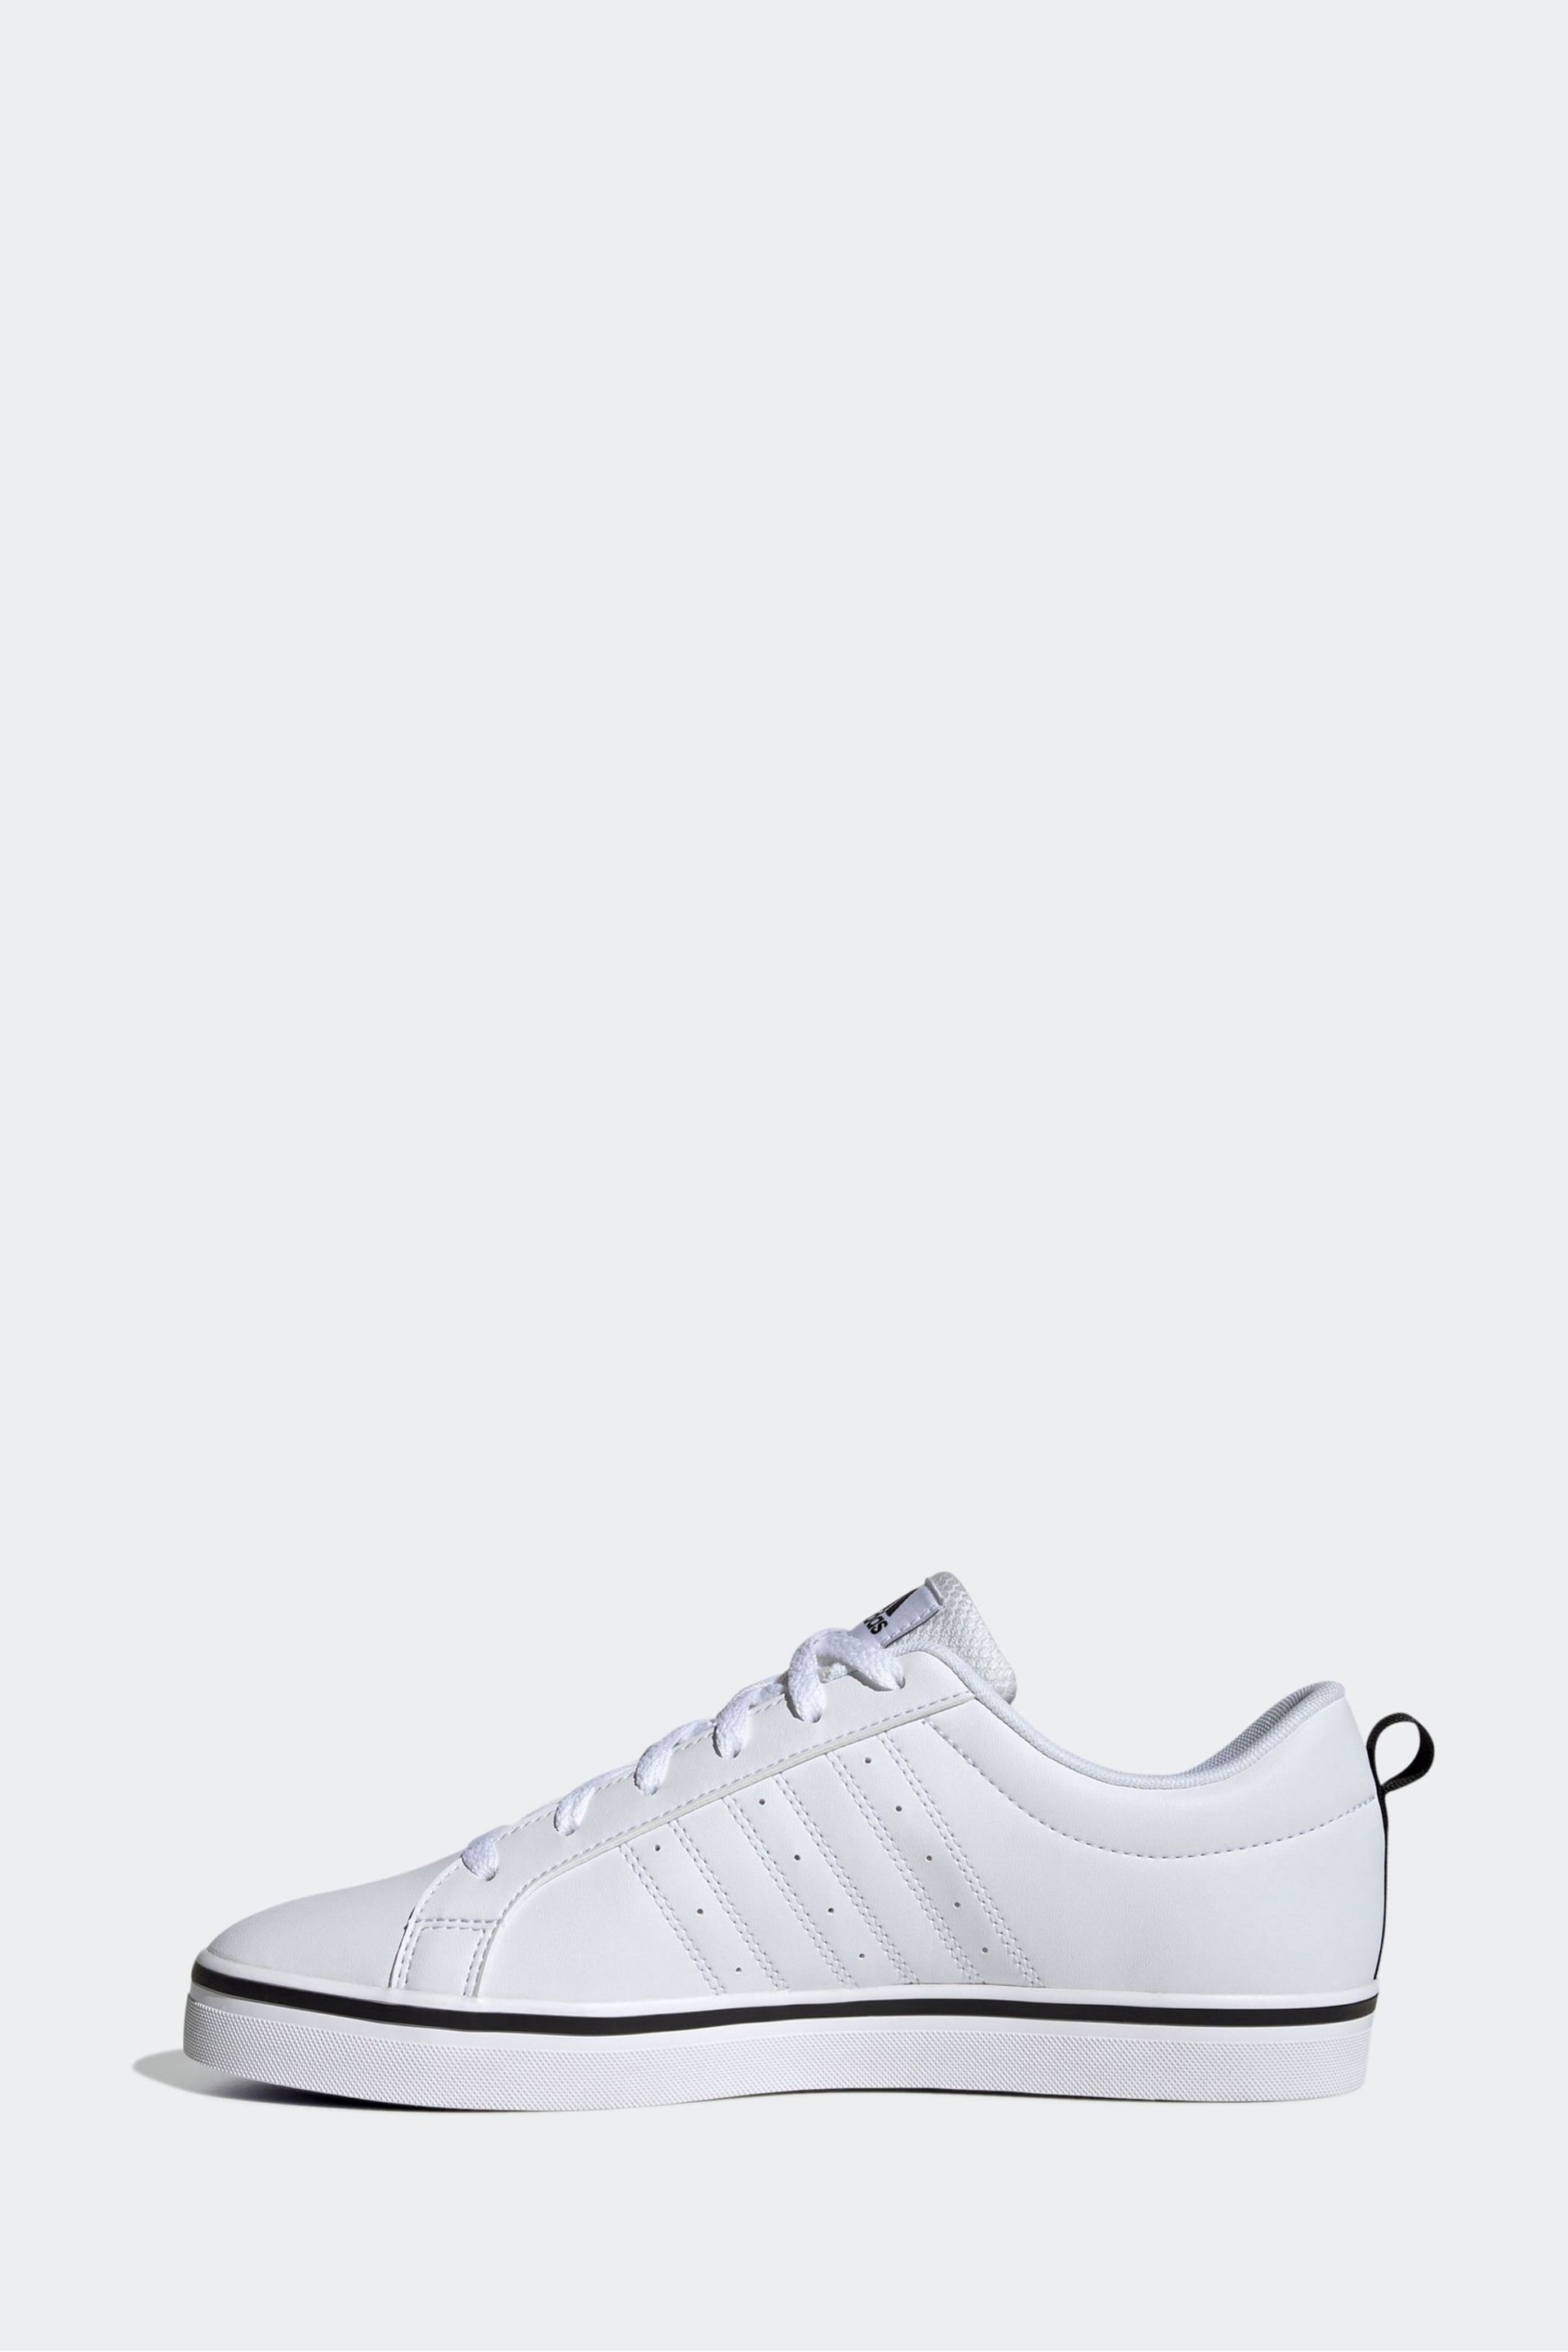 adidas White/Black Sportswear VS Pace Trainers - Image 2 of 9